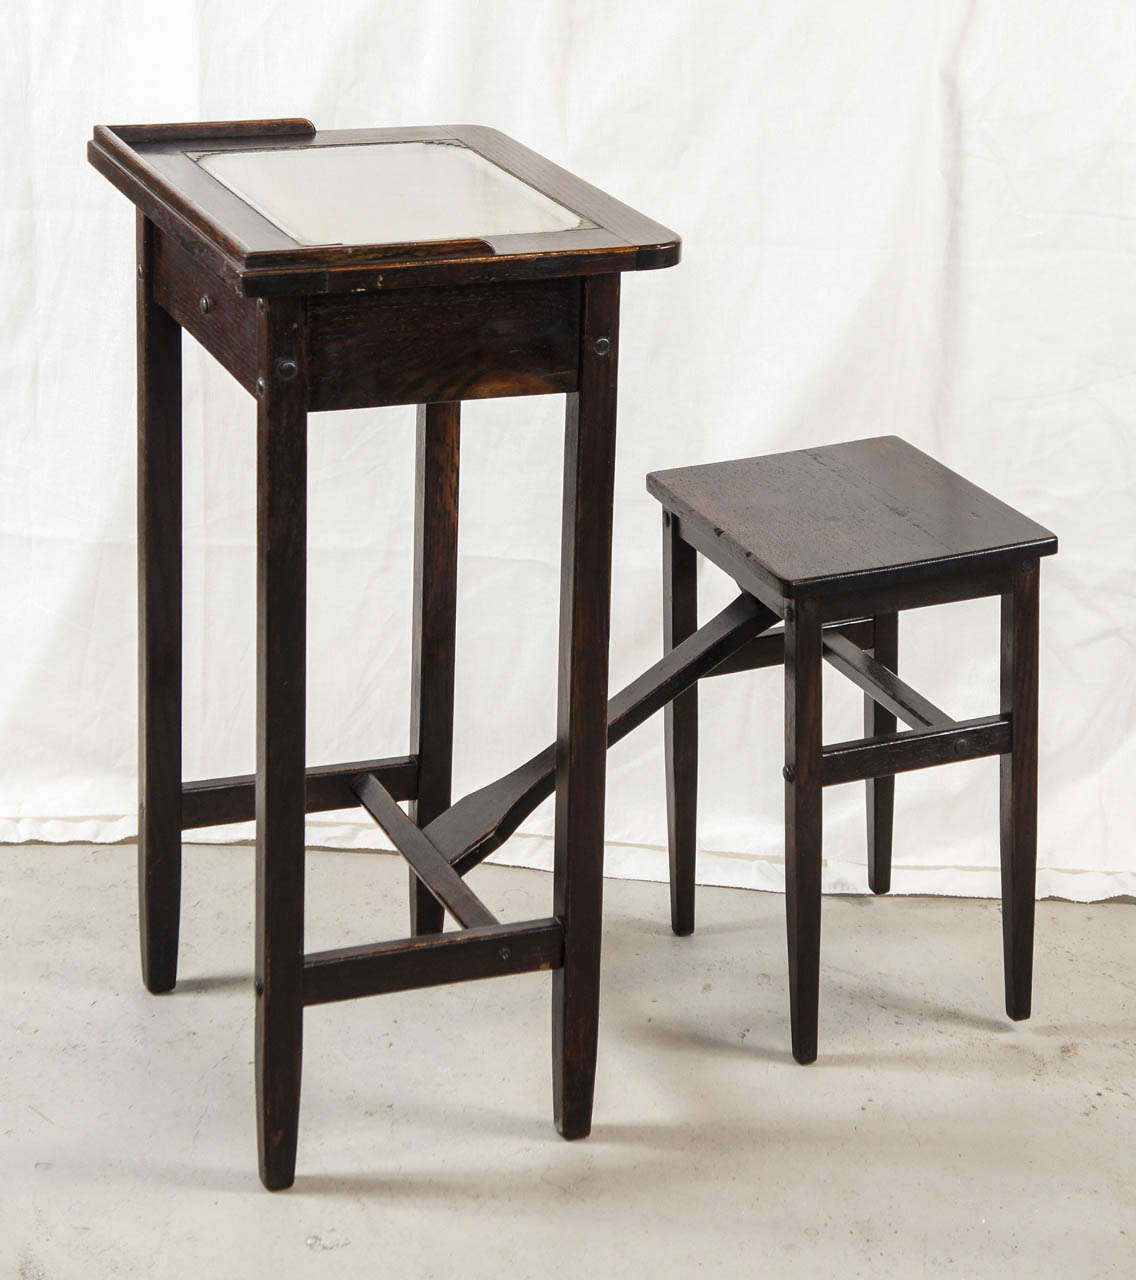 Wonderful example of an 1920's Telephone Table